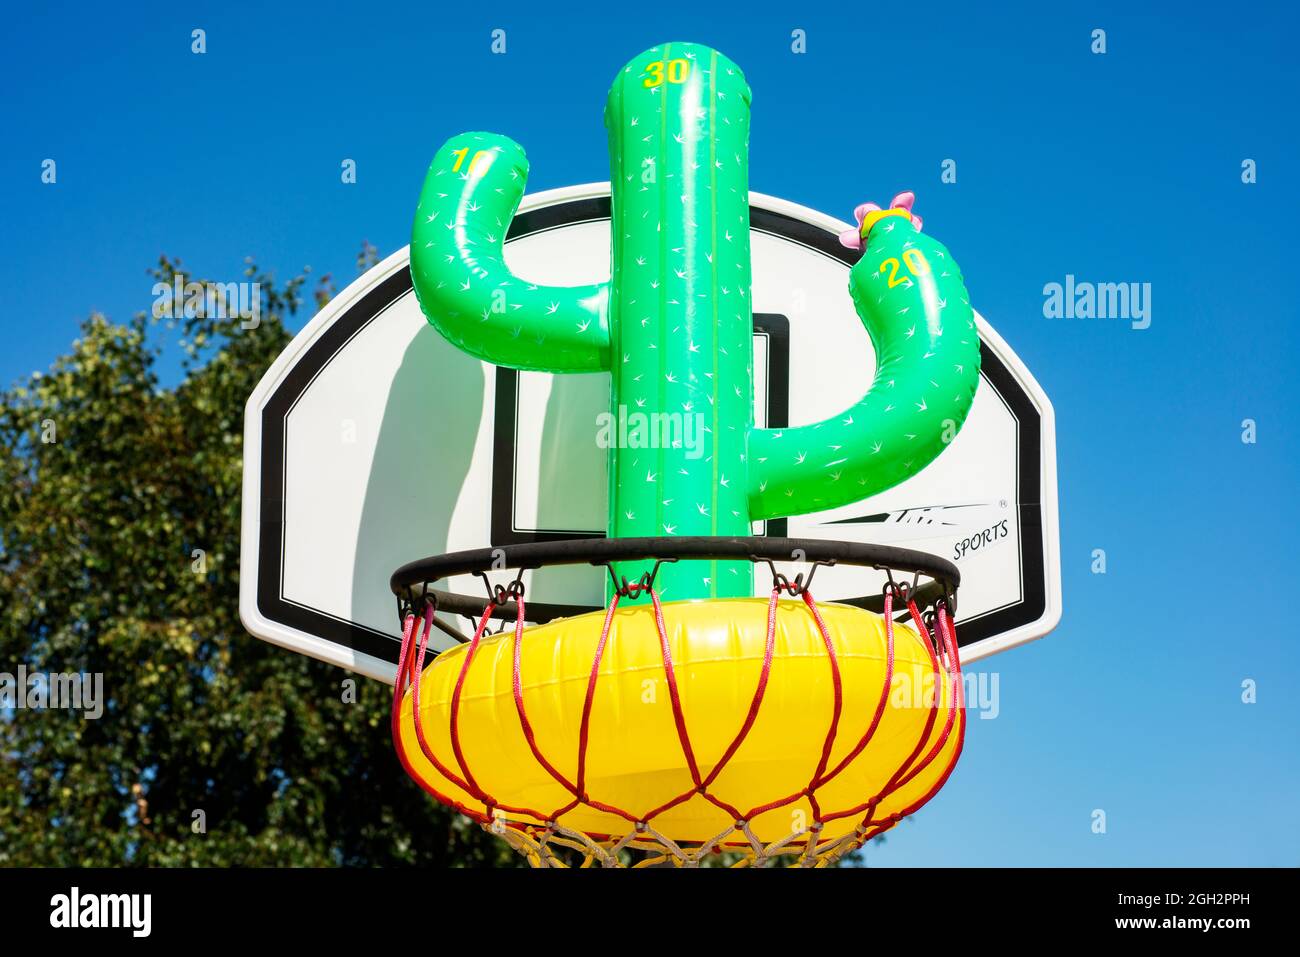 Inflatable catus in basketball hoop Stock Photo